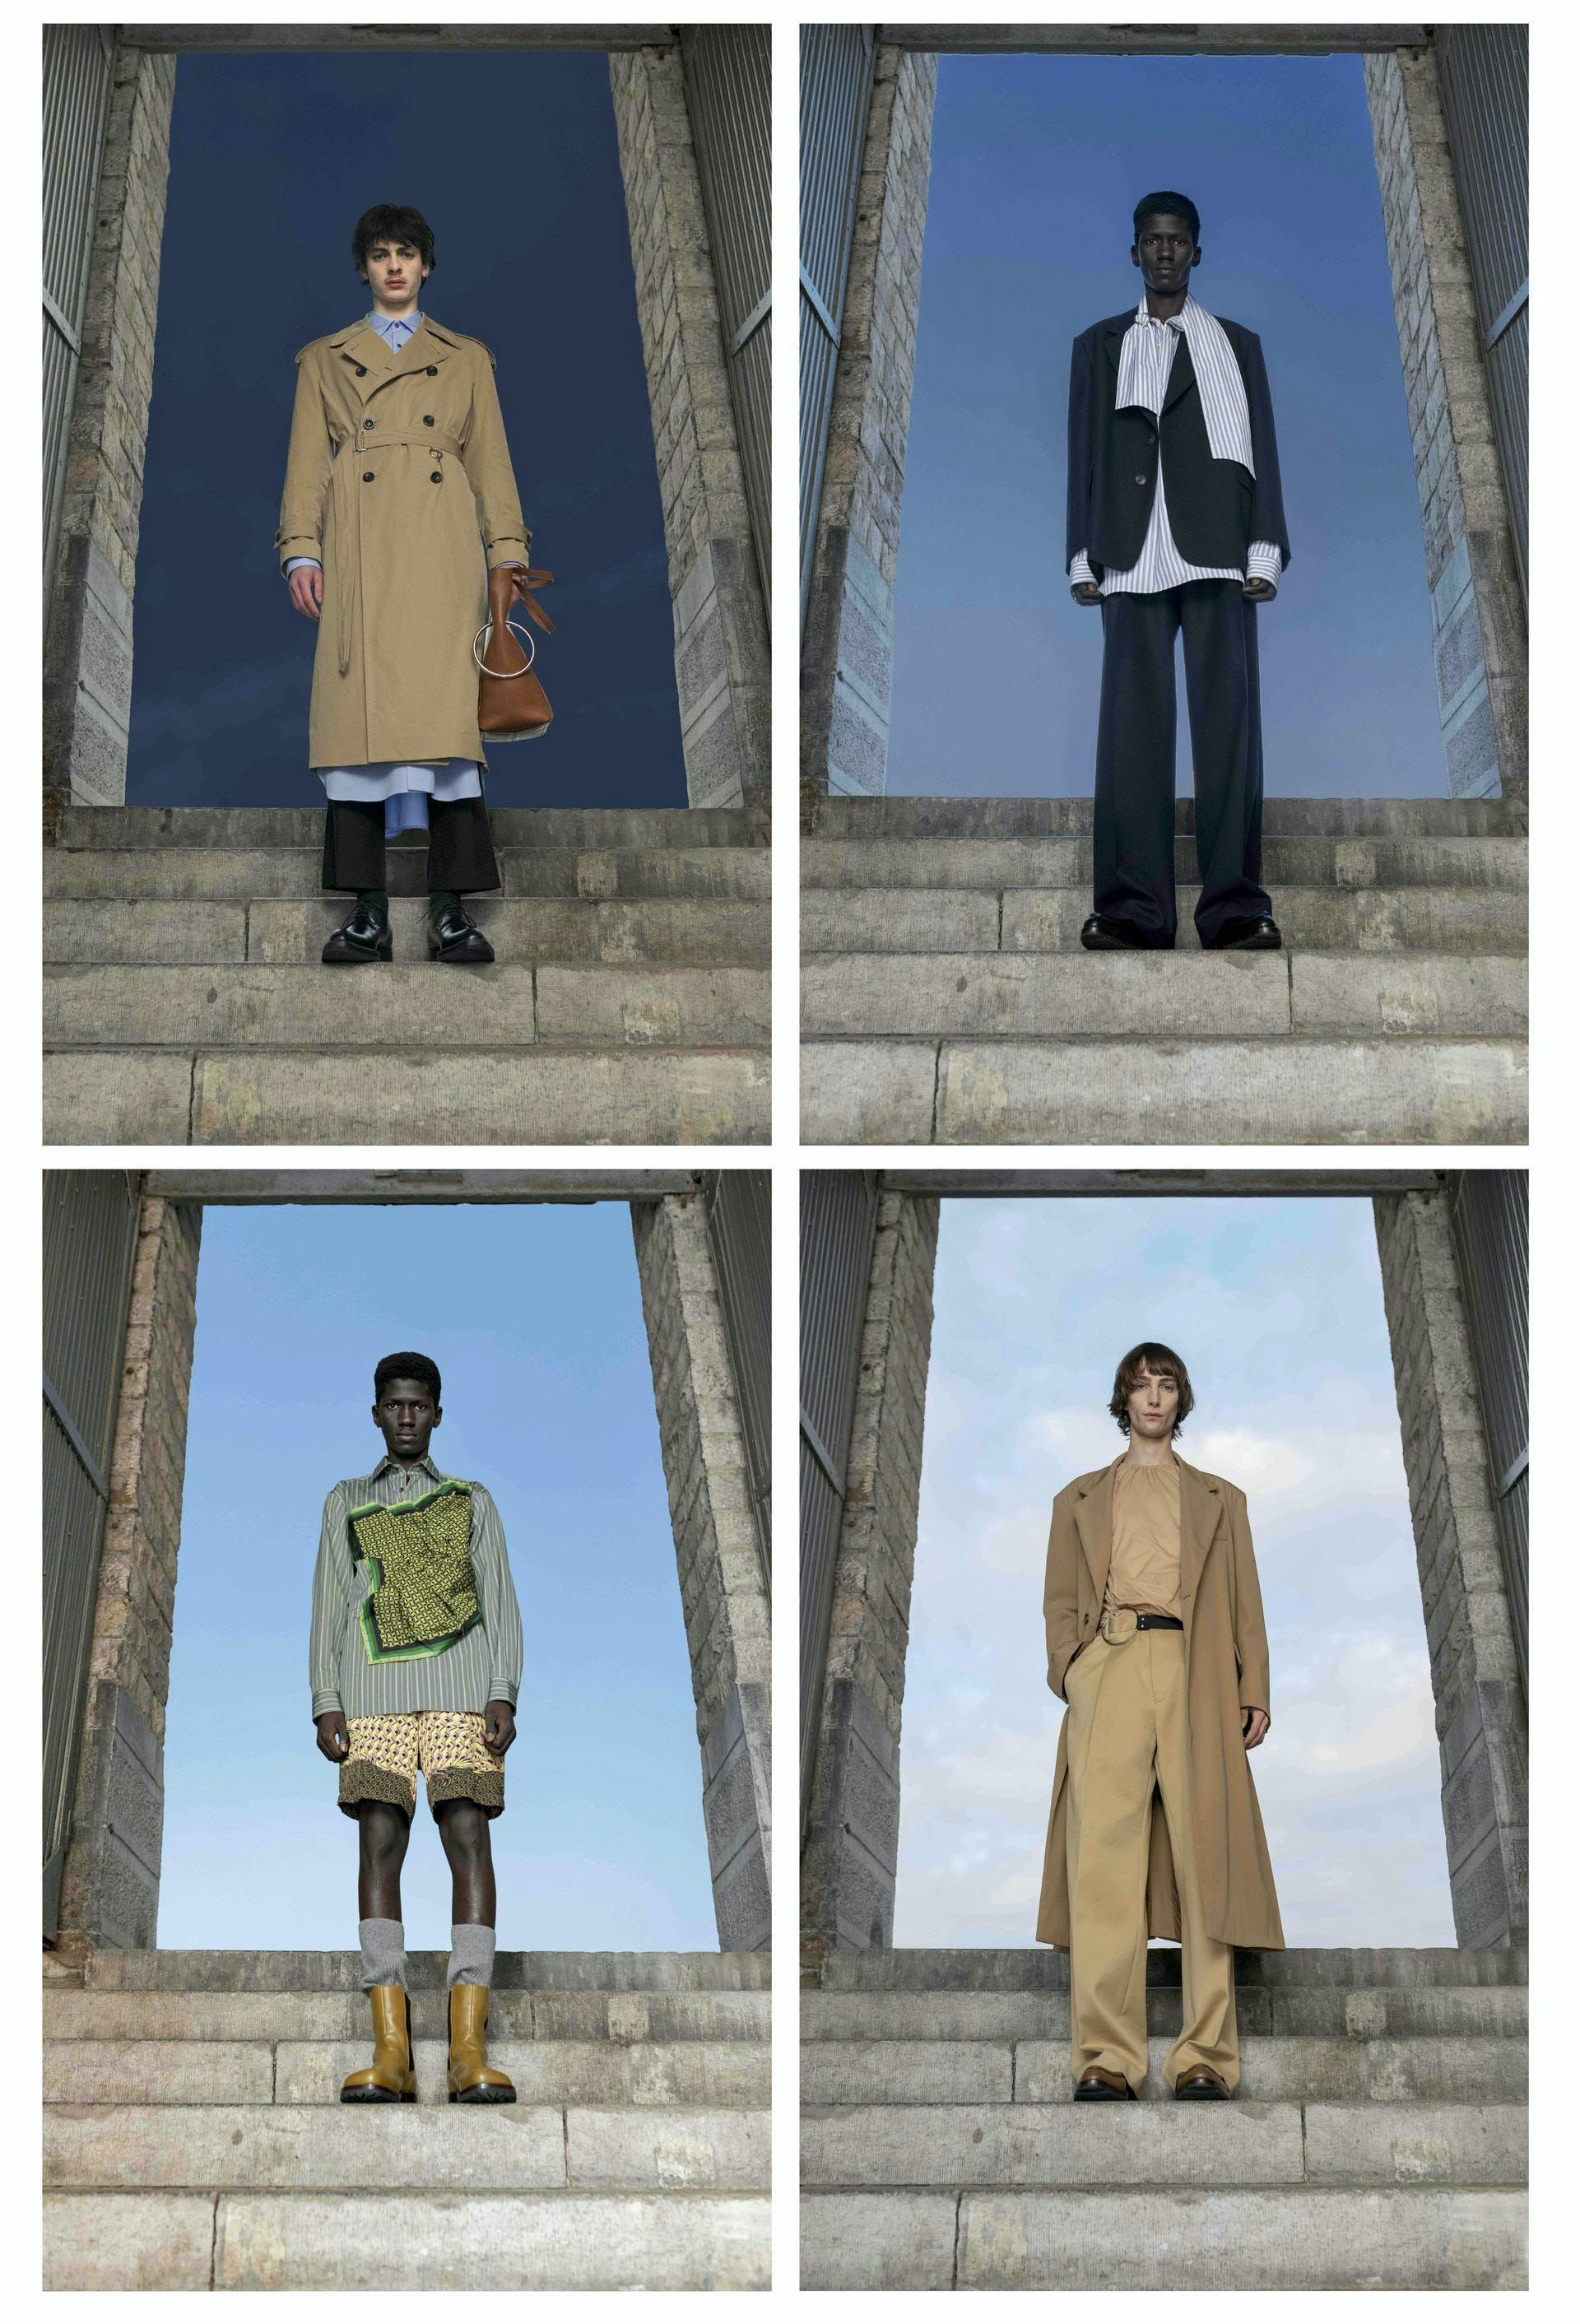 clothing apparel overcoat coat collage poster advertisement trench coat person human